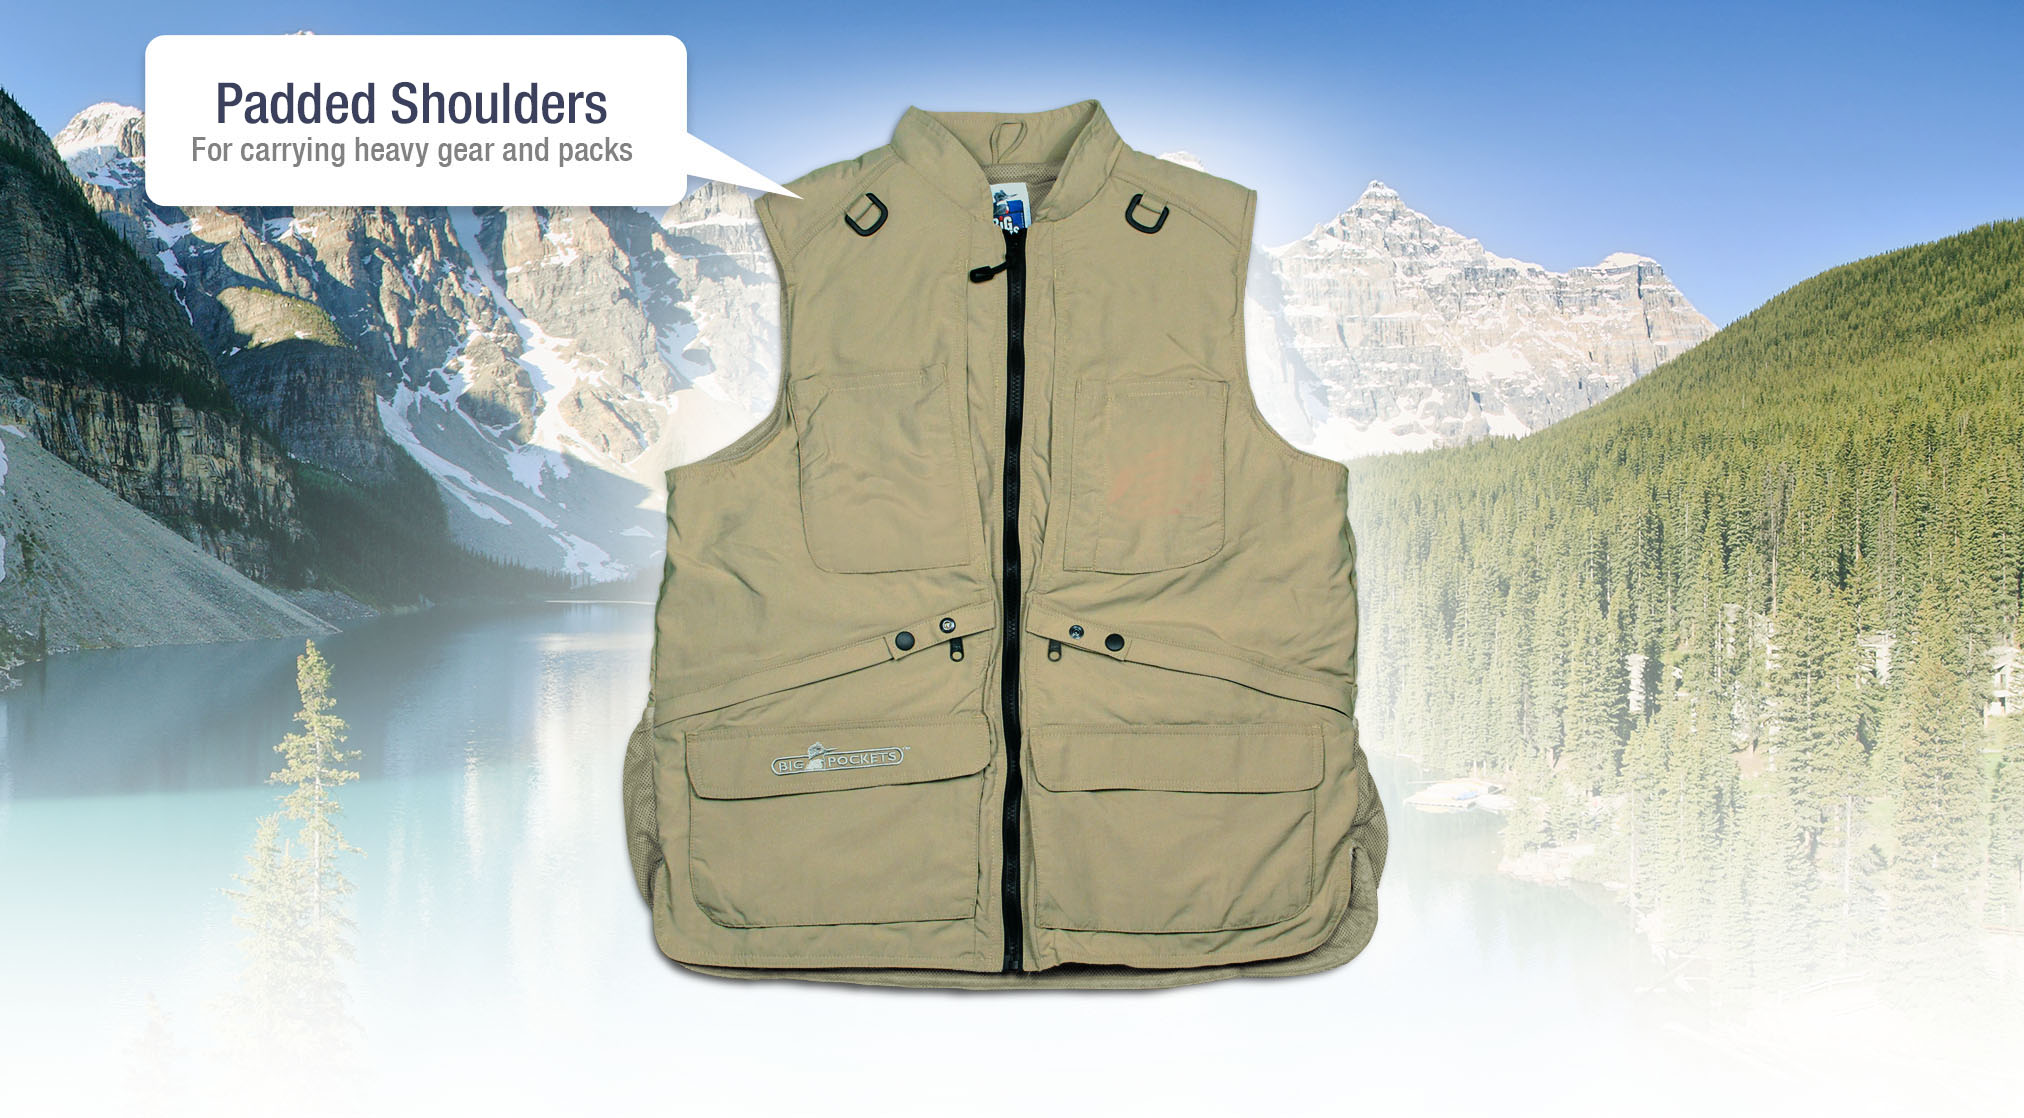 Padded Shoulders for carrying heavy gear and packs